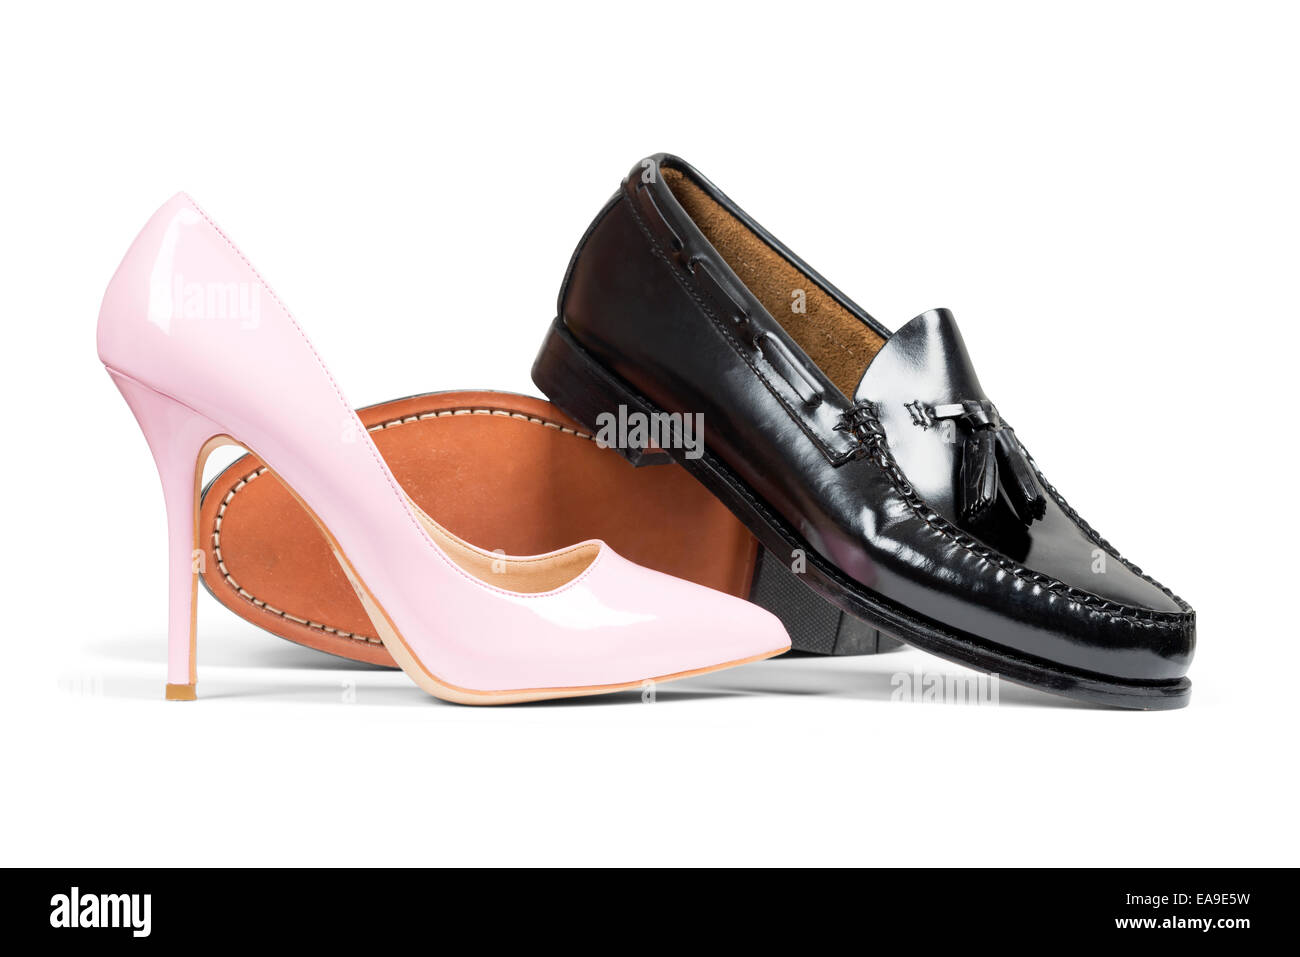 L'homme et des chaussures de luxe pour femmes rose chaussures talon isolated over white with clipping path. Banque D'Images